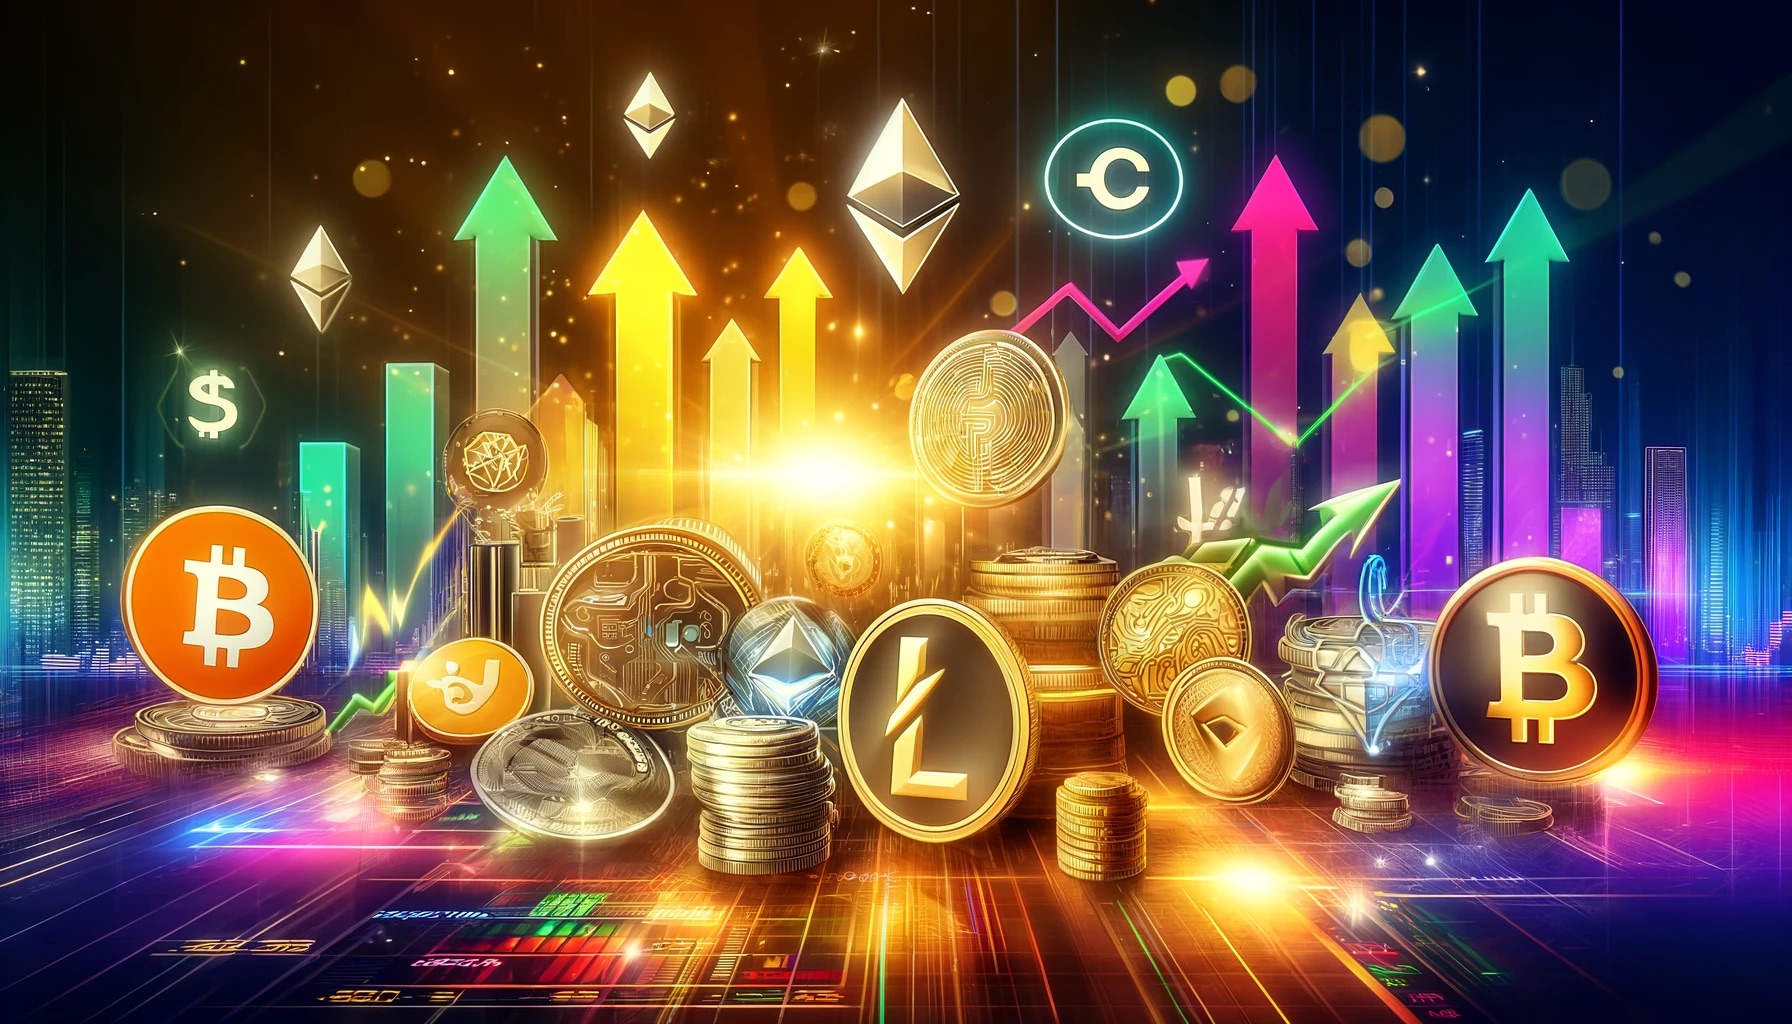 Crypto Analysts Reveal Sub-$1 Altcoins Set To Outperform In The Bull Run